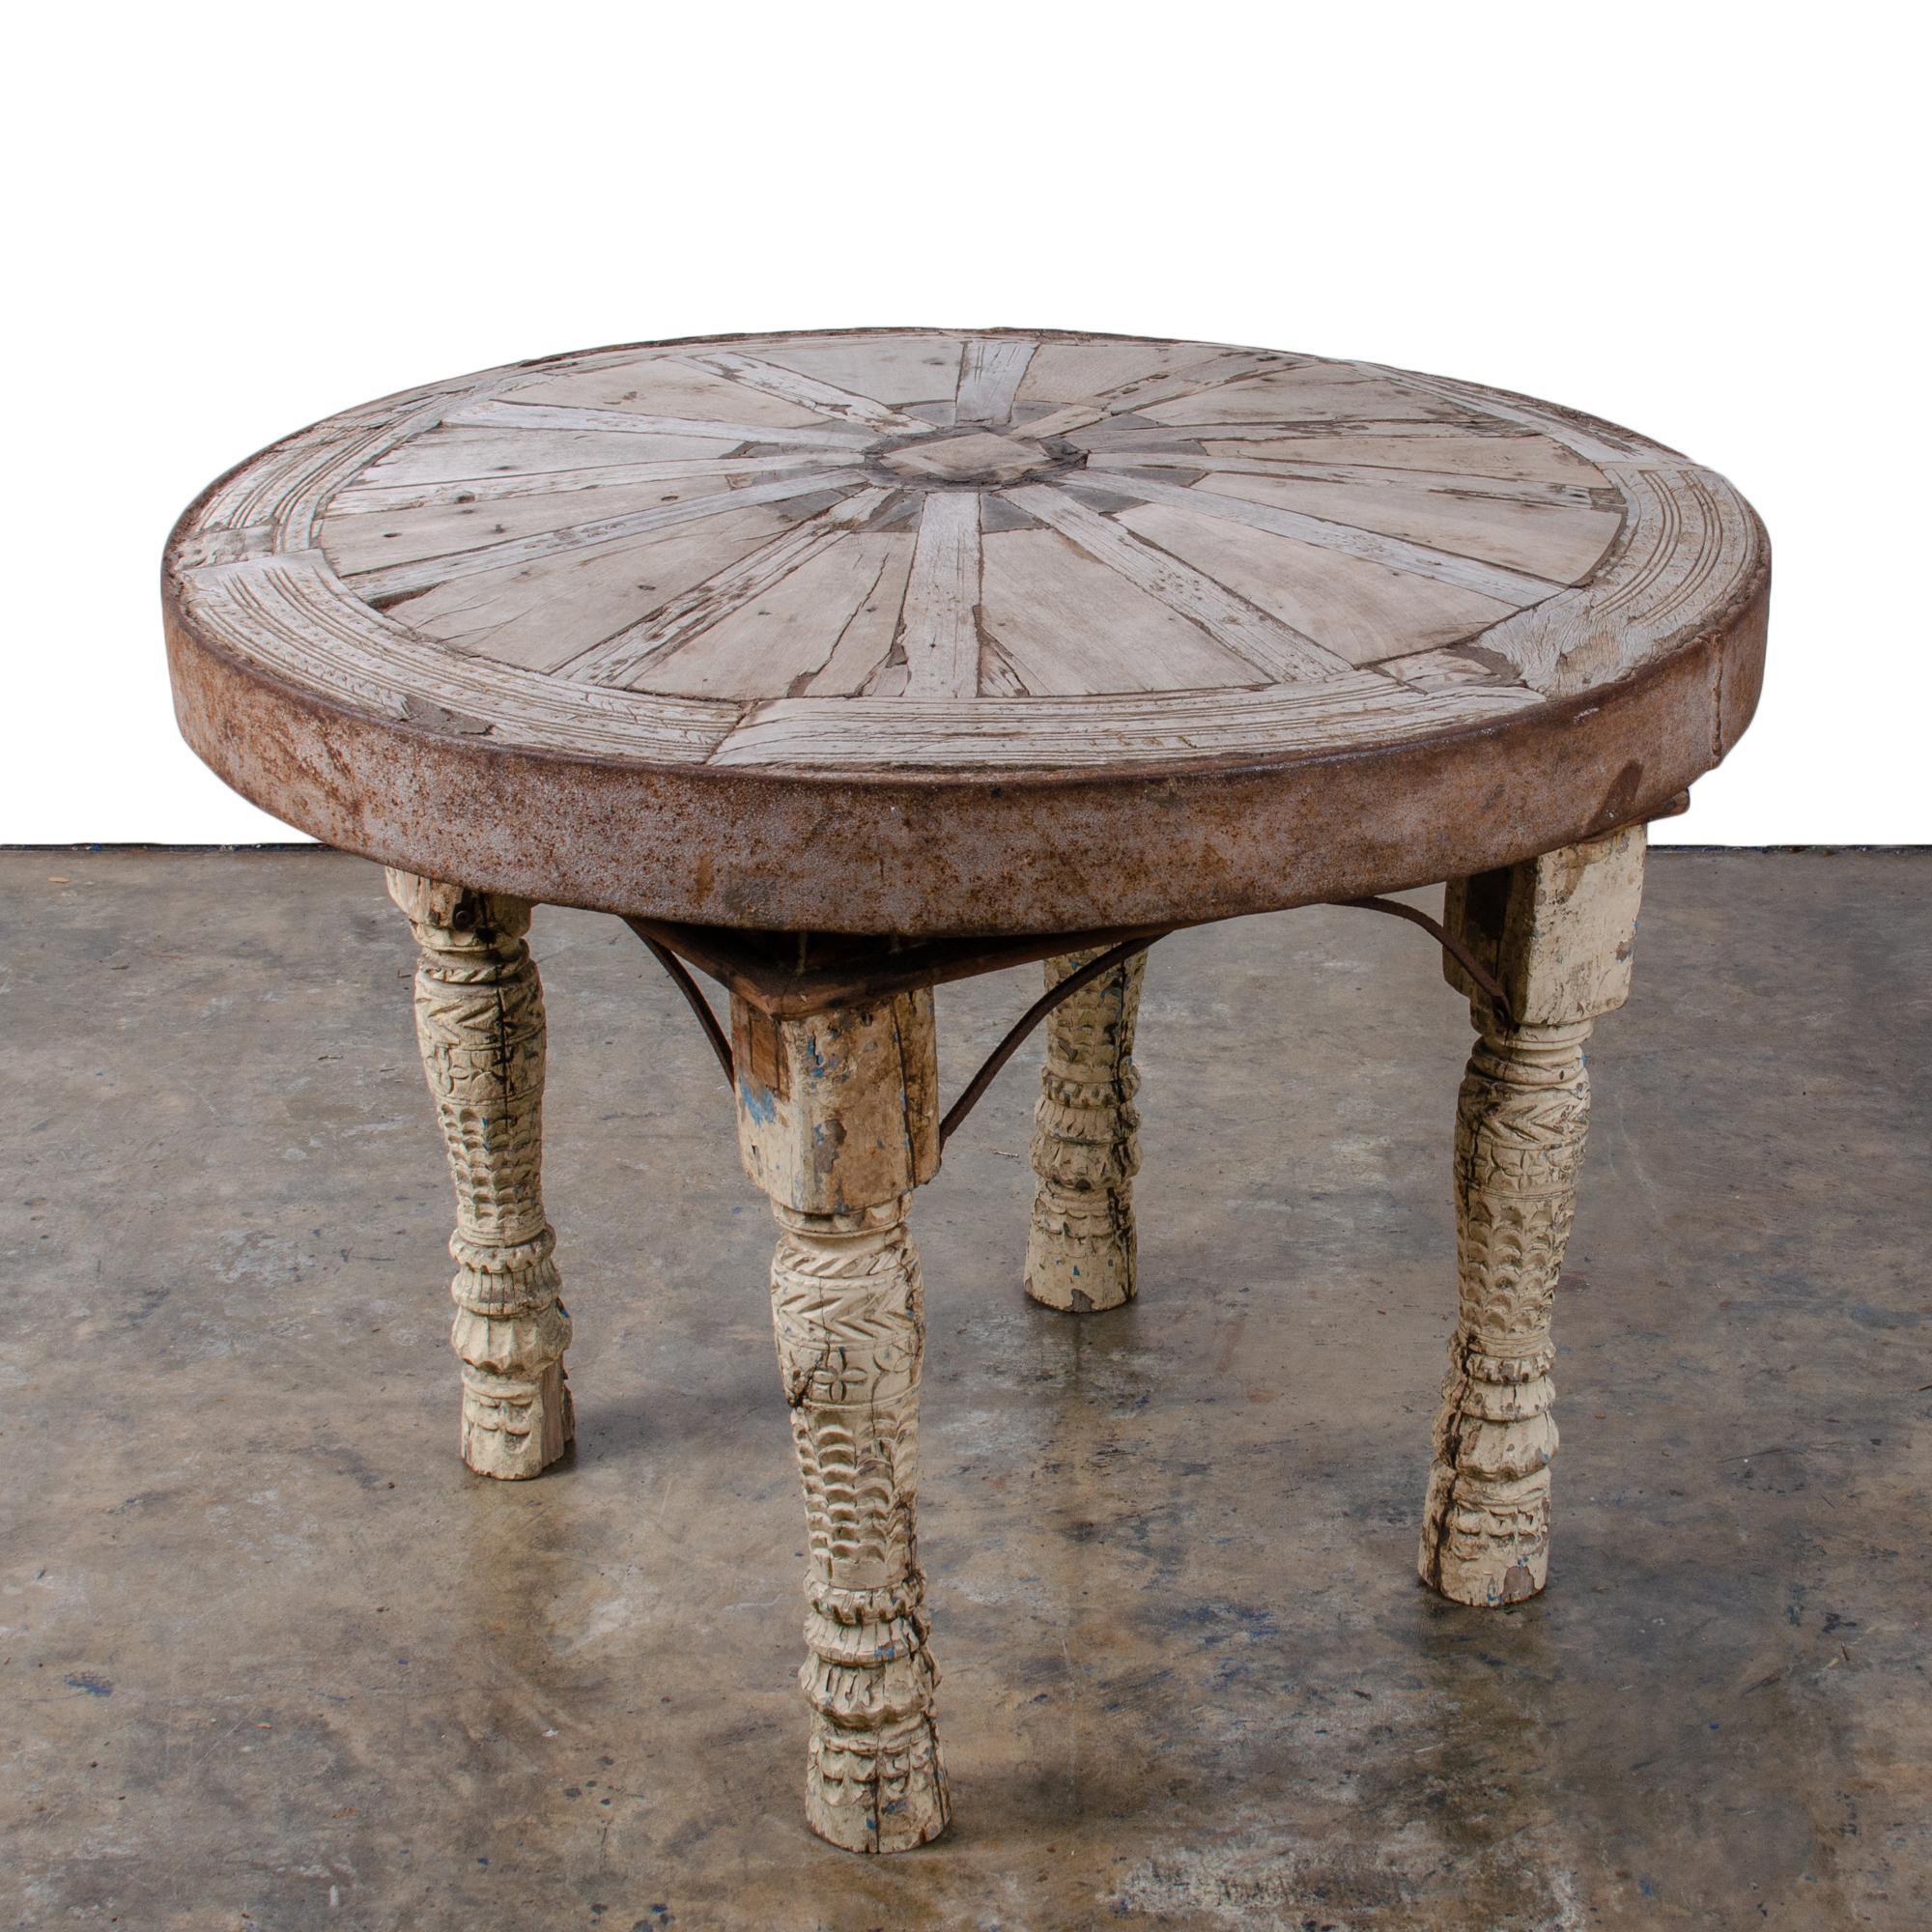 An antique Indian bullock cart wheel with iron tread mounted as a table on carved painted legs with iron bracing.  

34 inches wide by 33 inches deep by 24 inches tall

